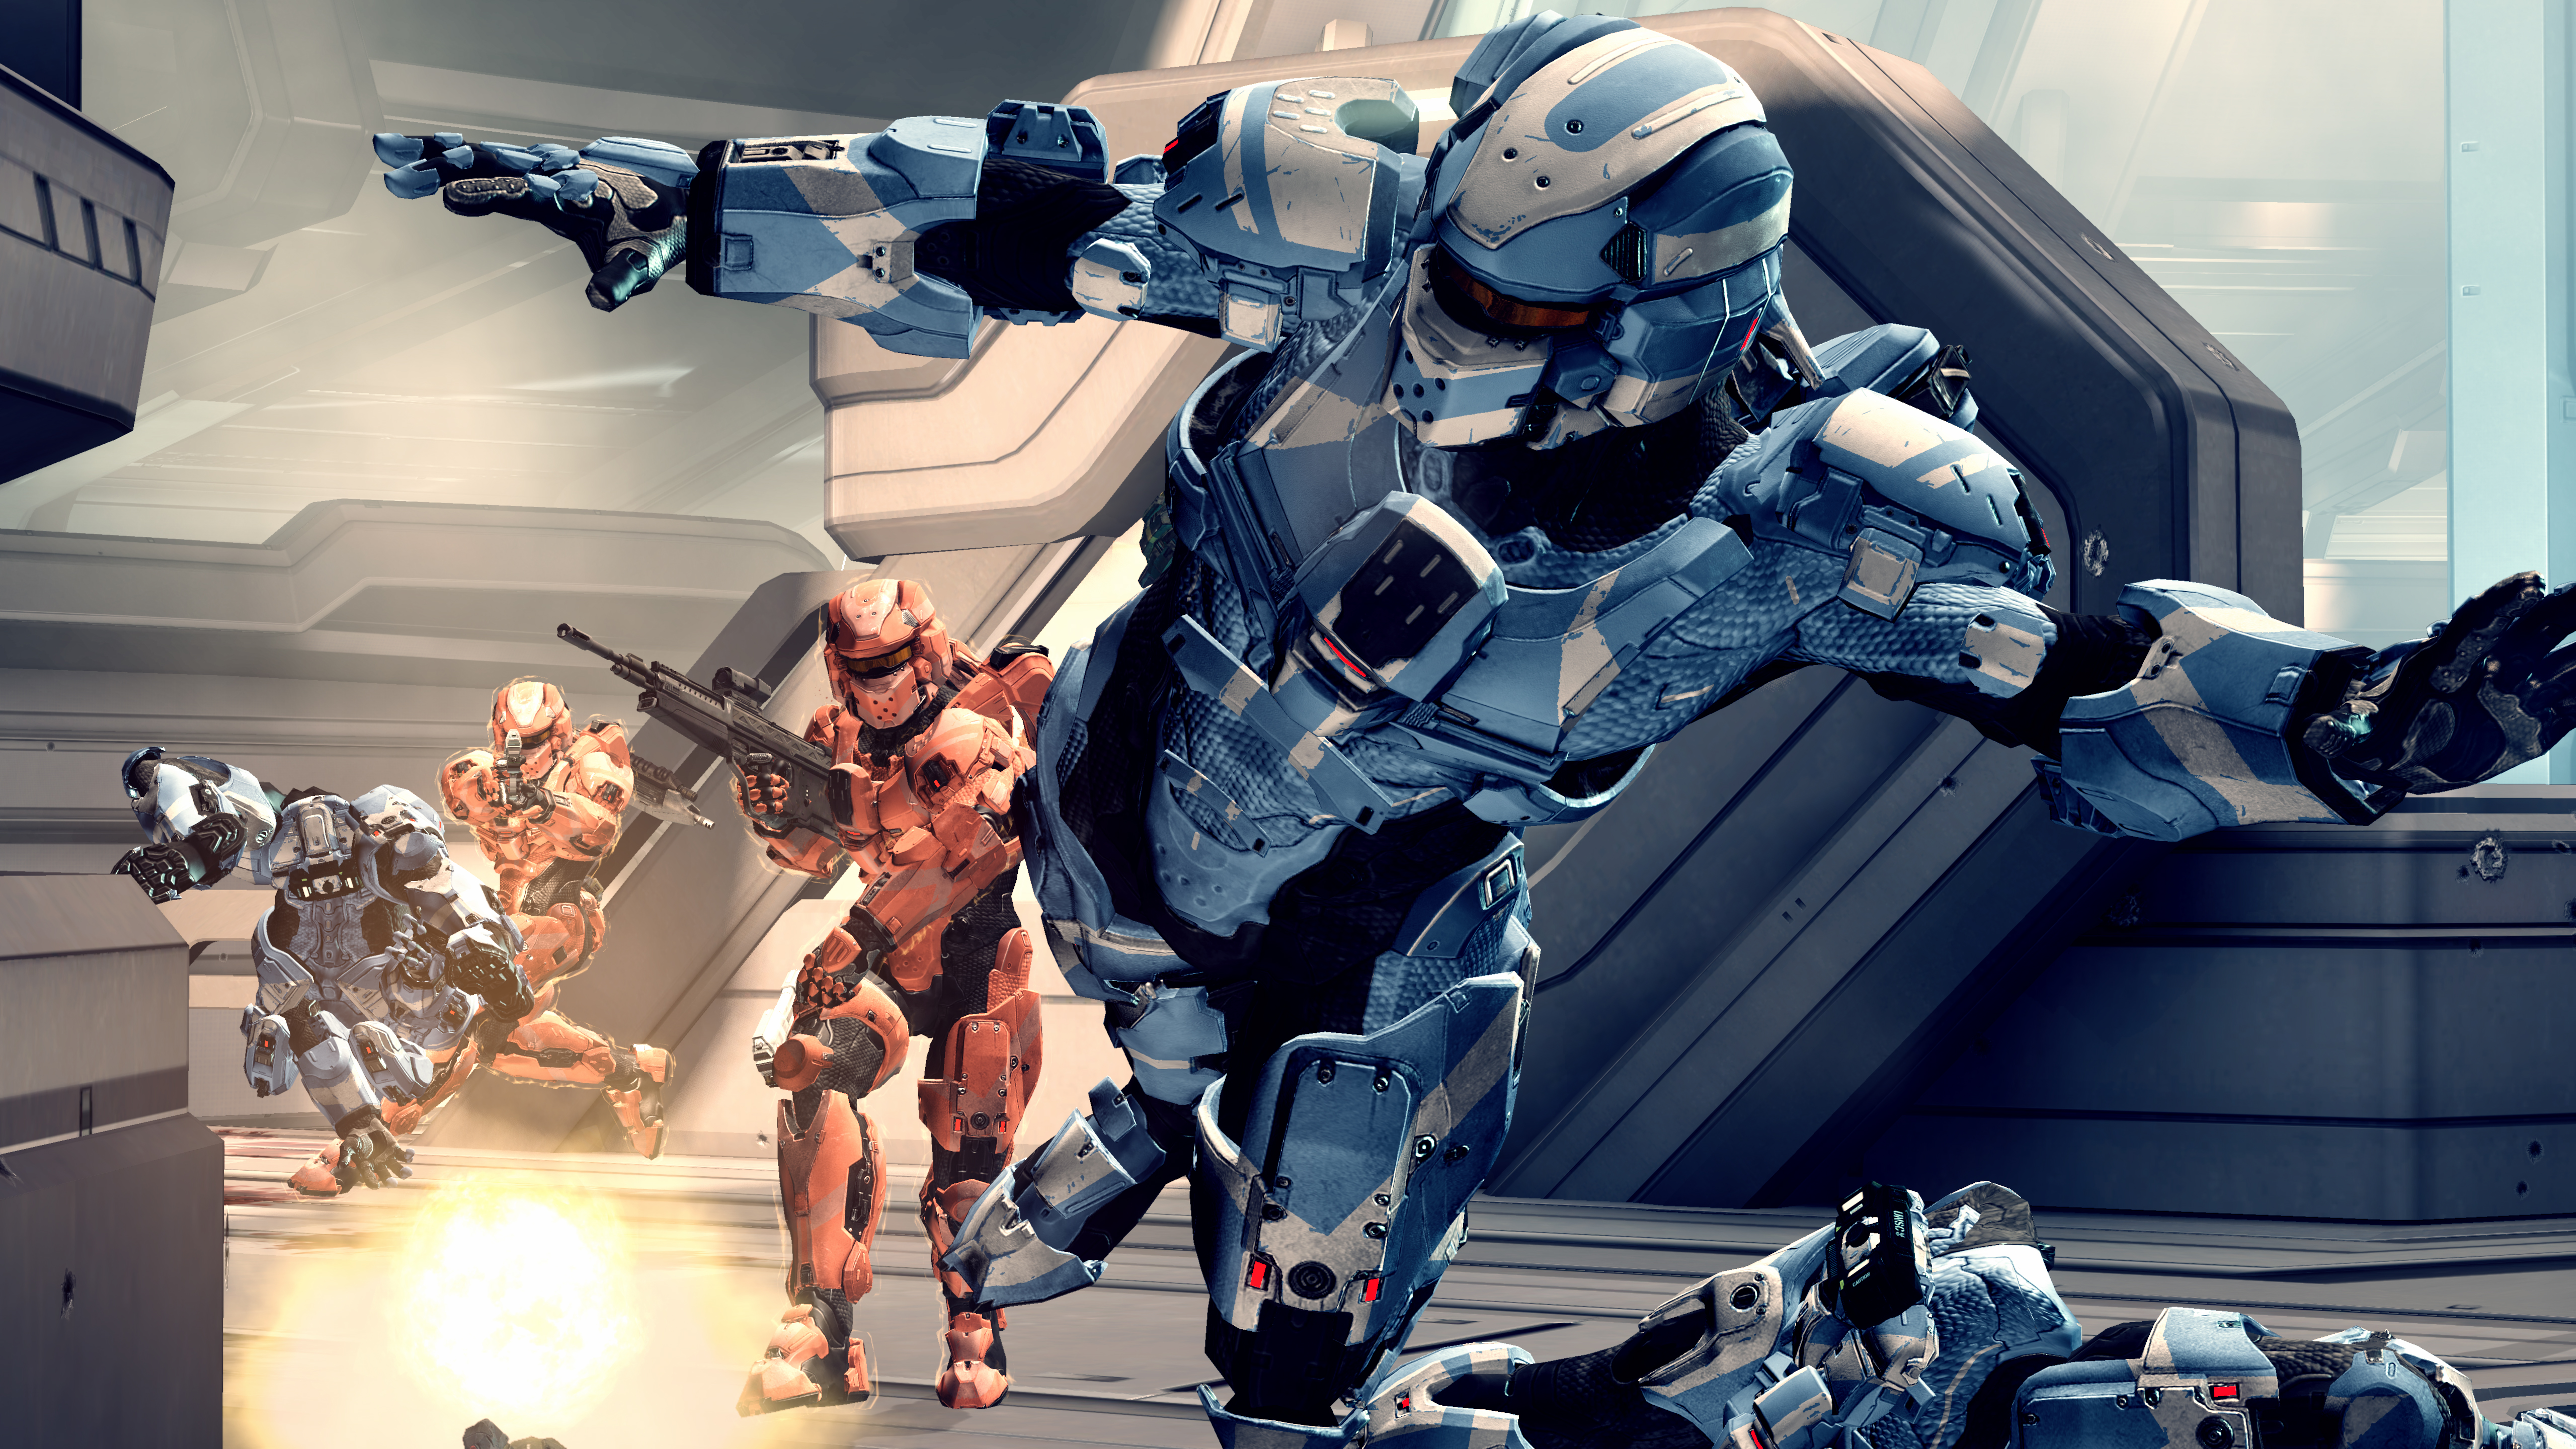 halo games on pc unblocked for multiplayer